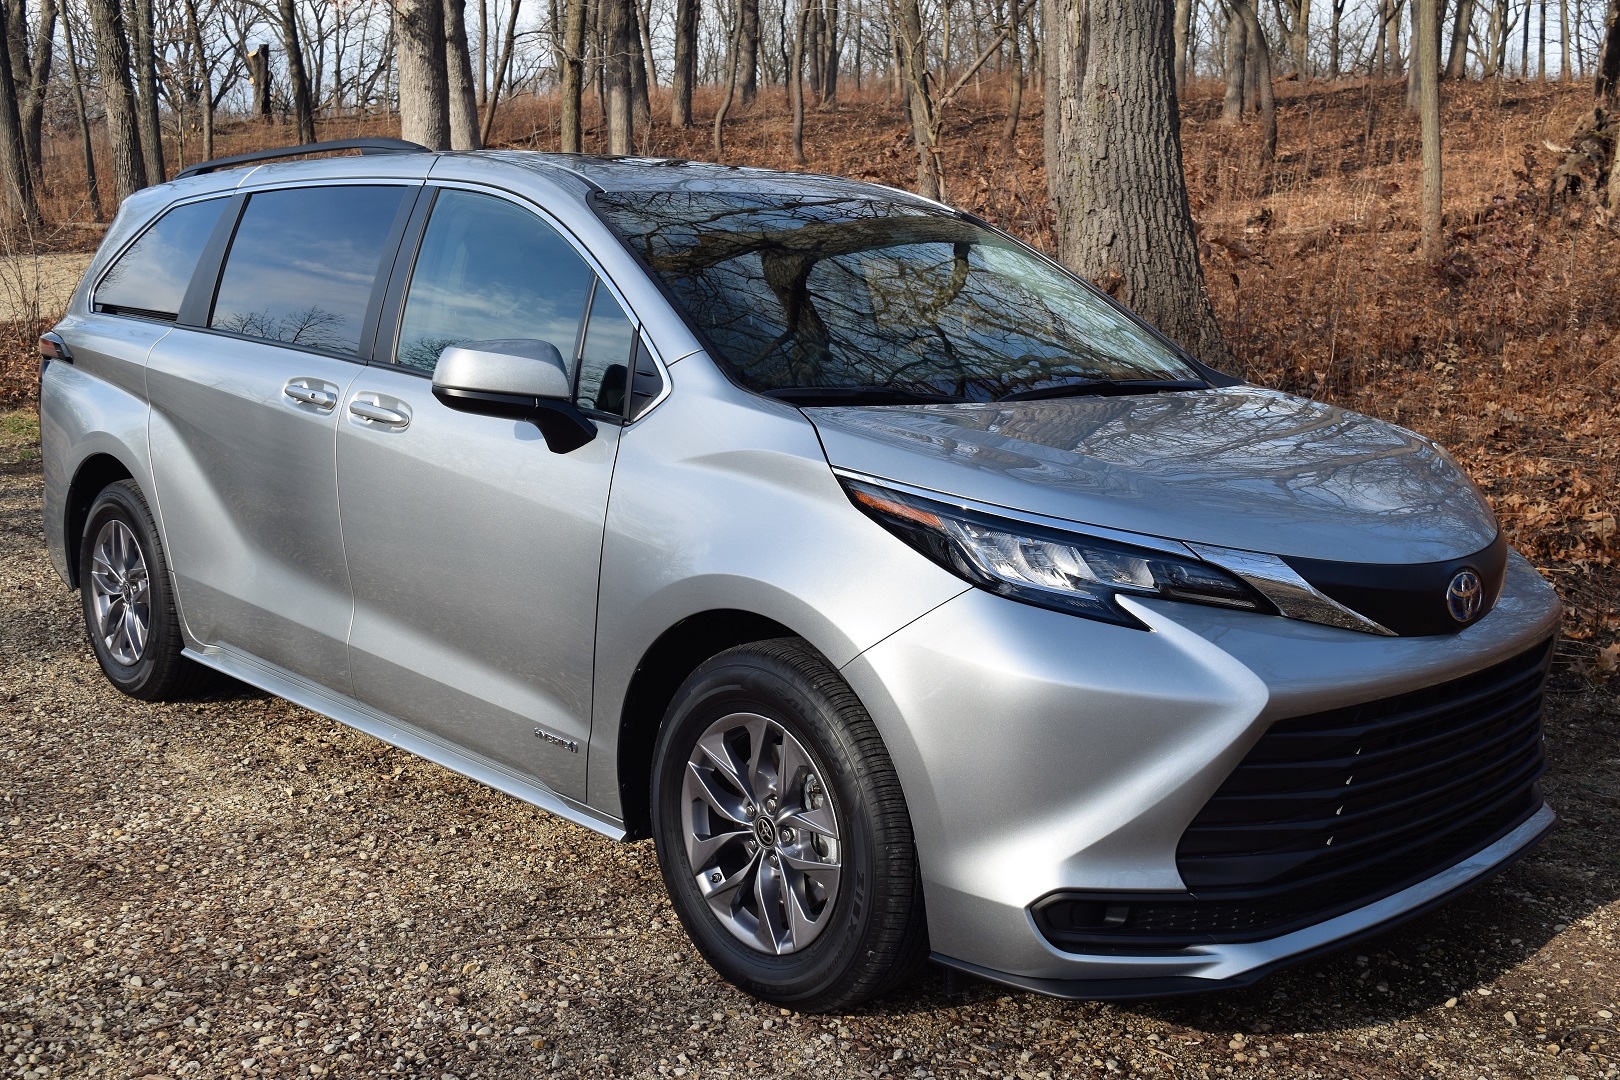 2021 Toyota Sienna Preview: Kids, Carseats & Safety – CarseatBlog